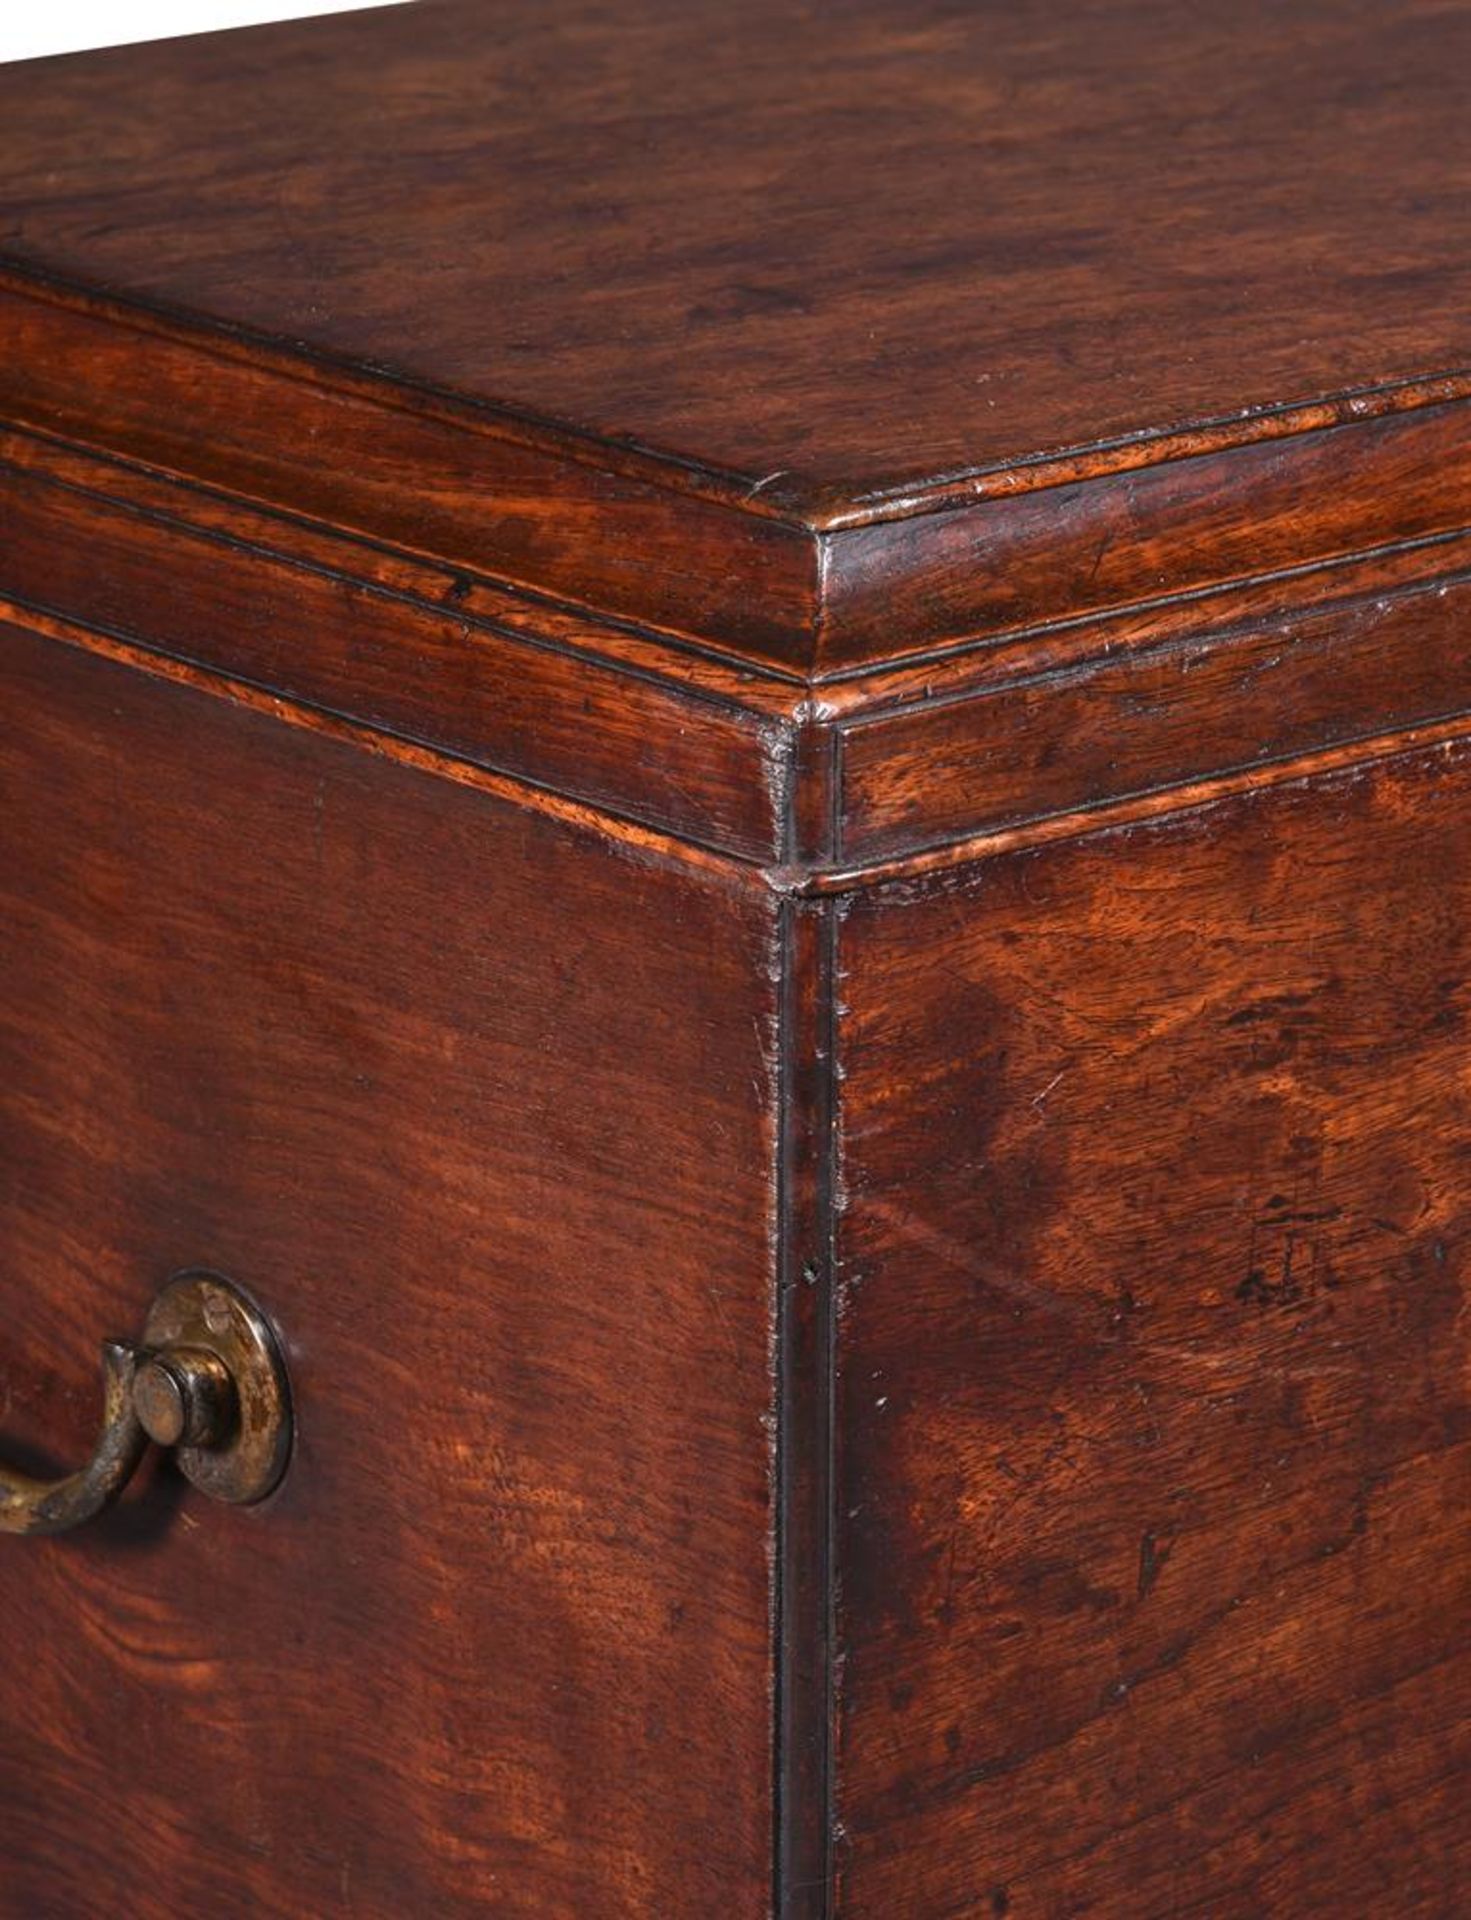 A GEORGE III MAHOGANY MULE CHEST ON STAND, IN THE MANNER OF THOMAS CHIPPENDALE, CIRCA 1760 - Image 3 of 4